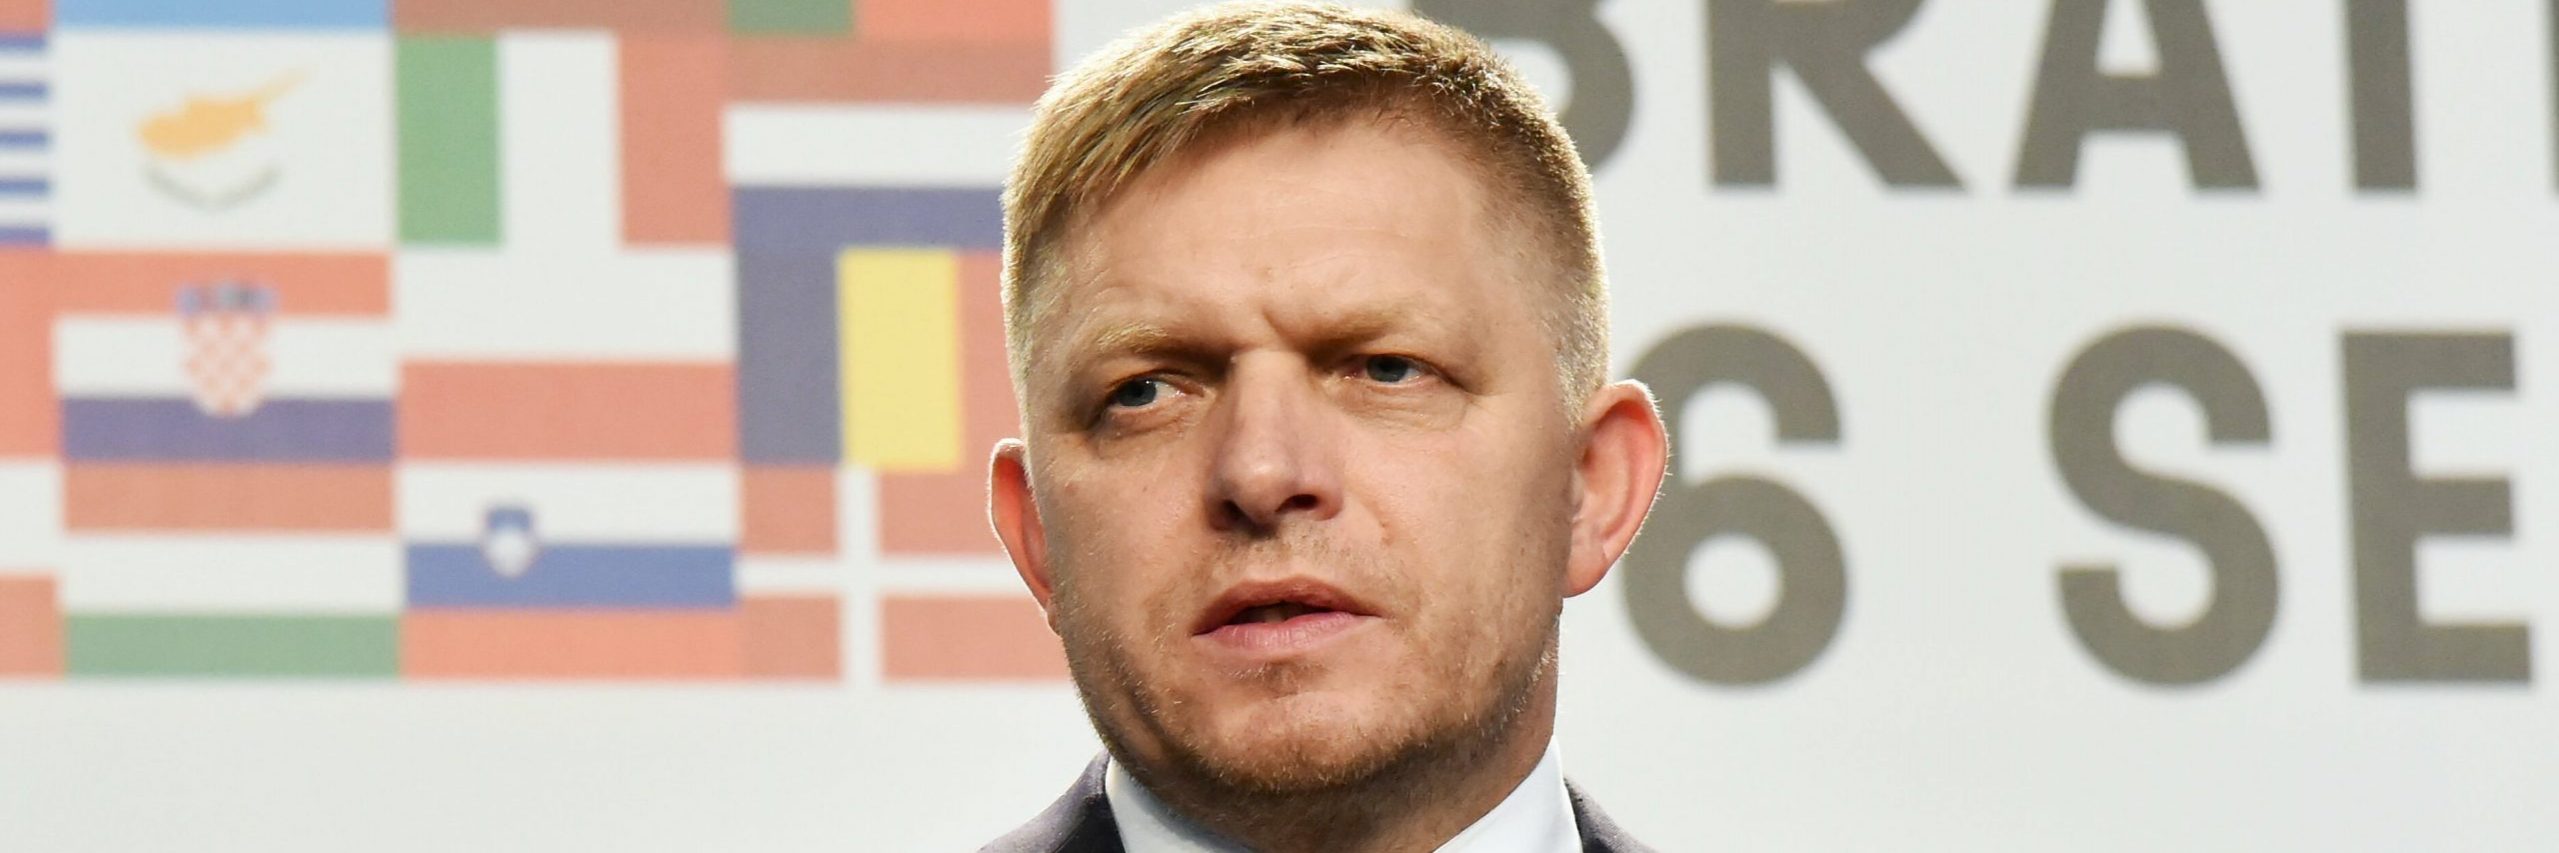 An image of Robert Fico, current Prime Minister of Slovakia, who has recently survived an assassination attempt, holding a press conference at the Bratislava Summit in 2016. Image source: EU2016 SK, via Wikimedia Commons